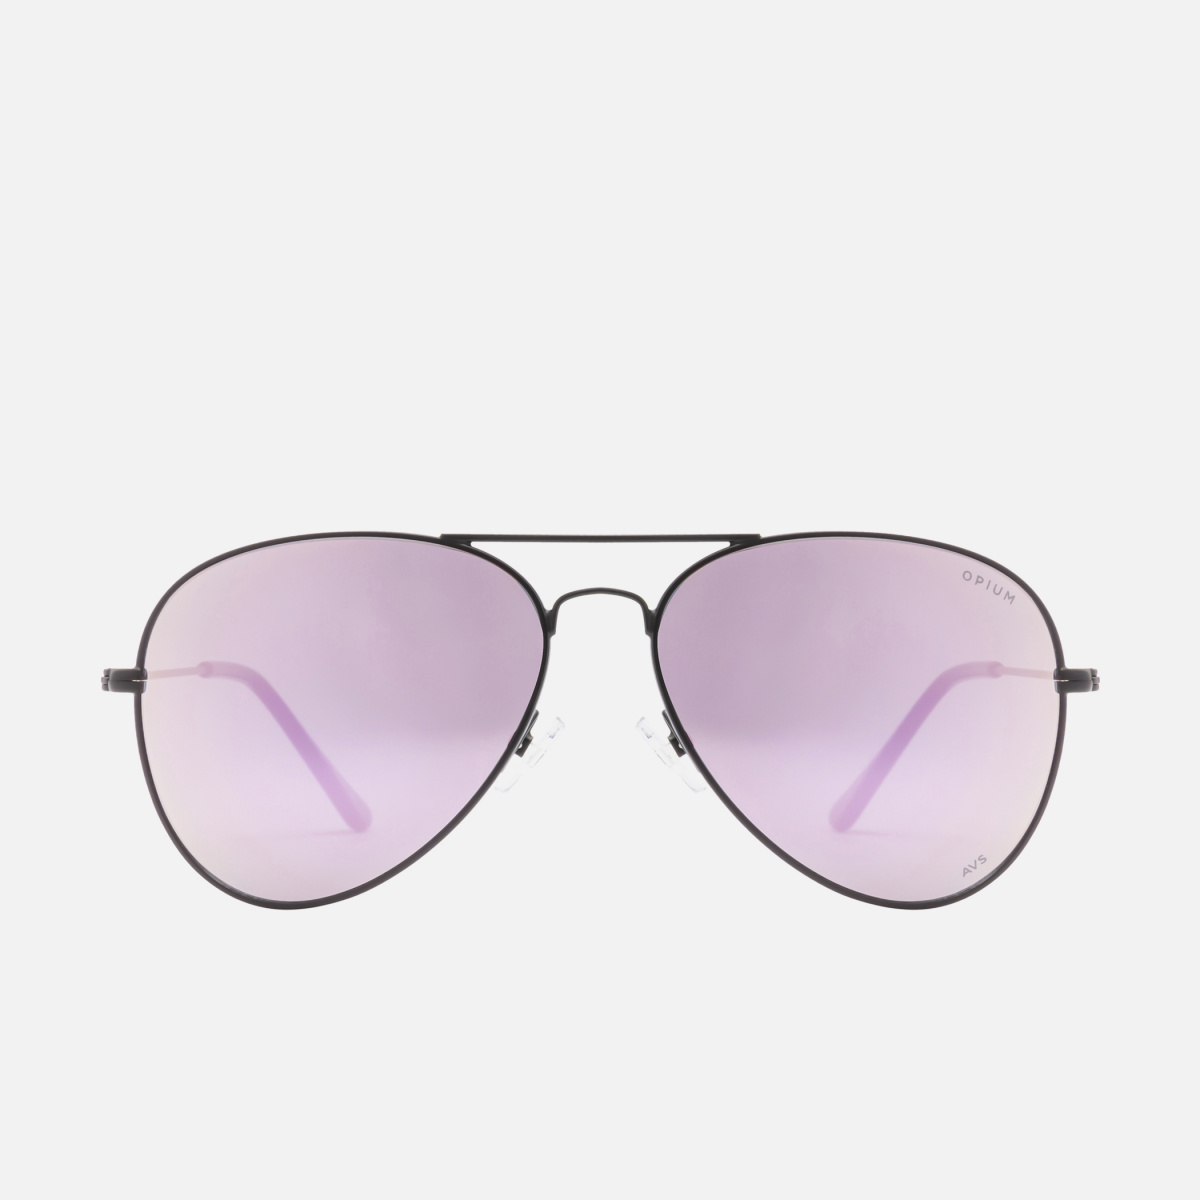 Frame of Reference Rose Gold Mirrored Aviator Sunglasses | Mirrored aviator  sunglasses, Pink mirrored sunglasses, Rose gold mirrored sunglasses